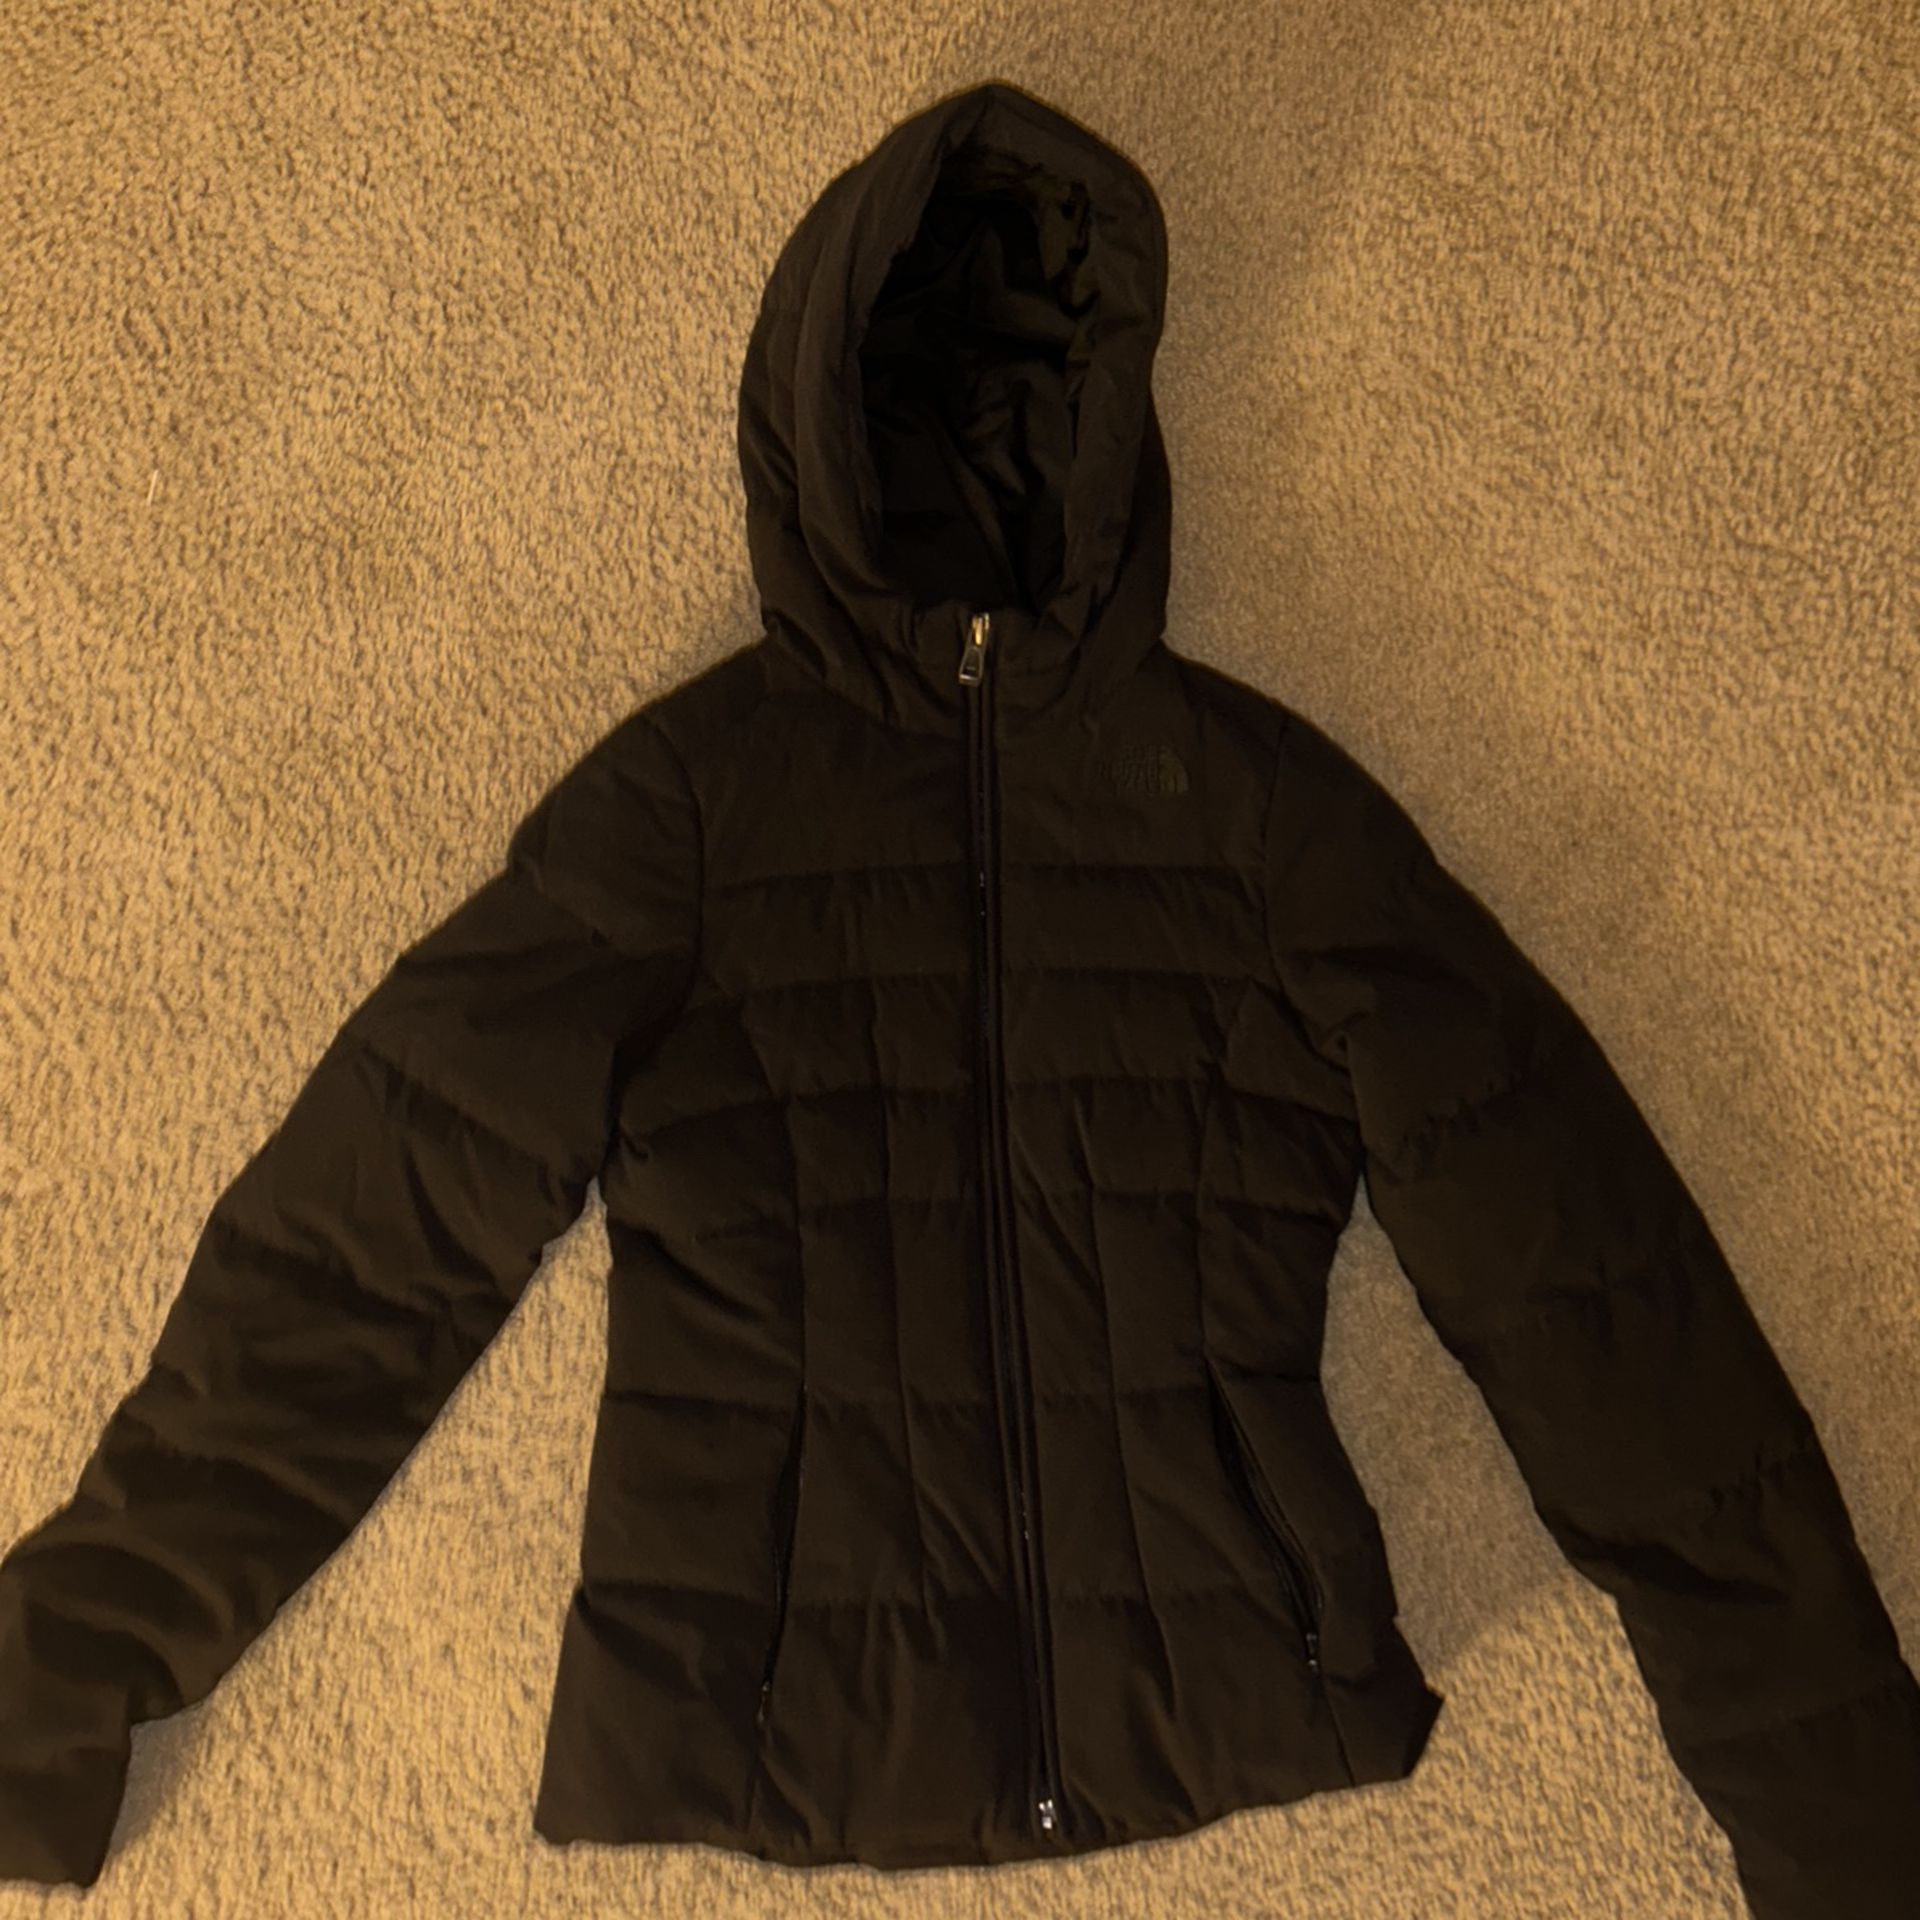 XS Women’s North Face Jacket 